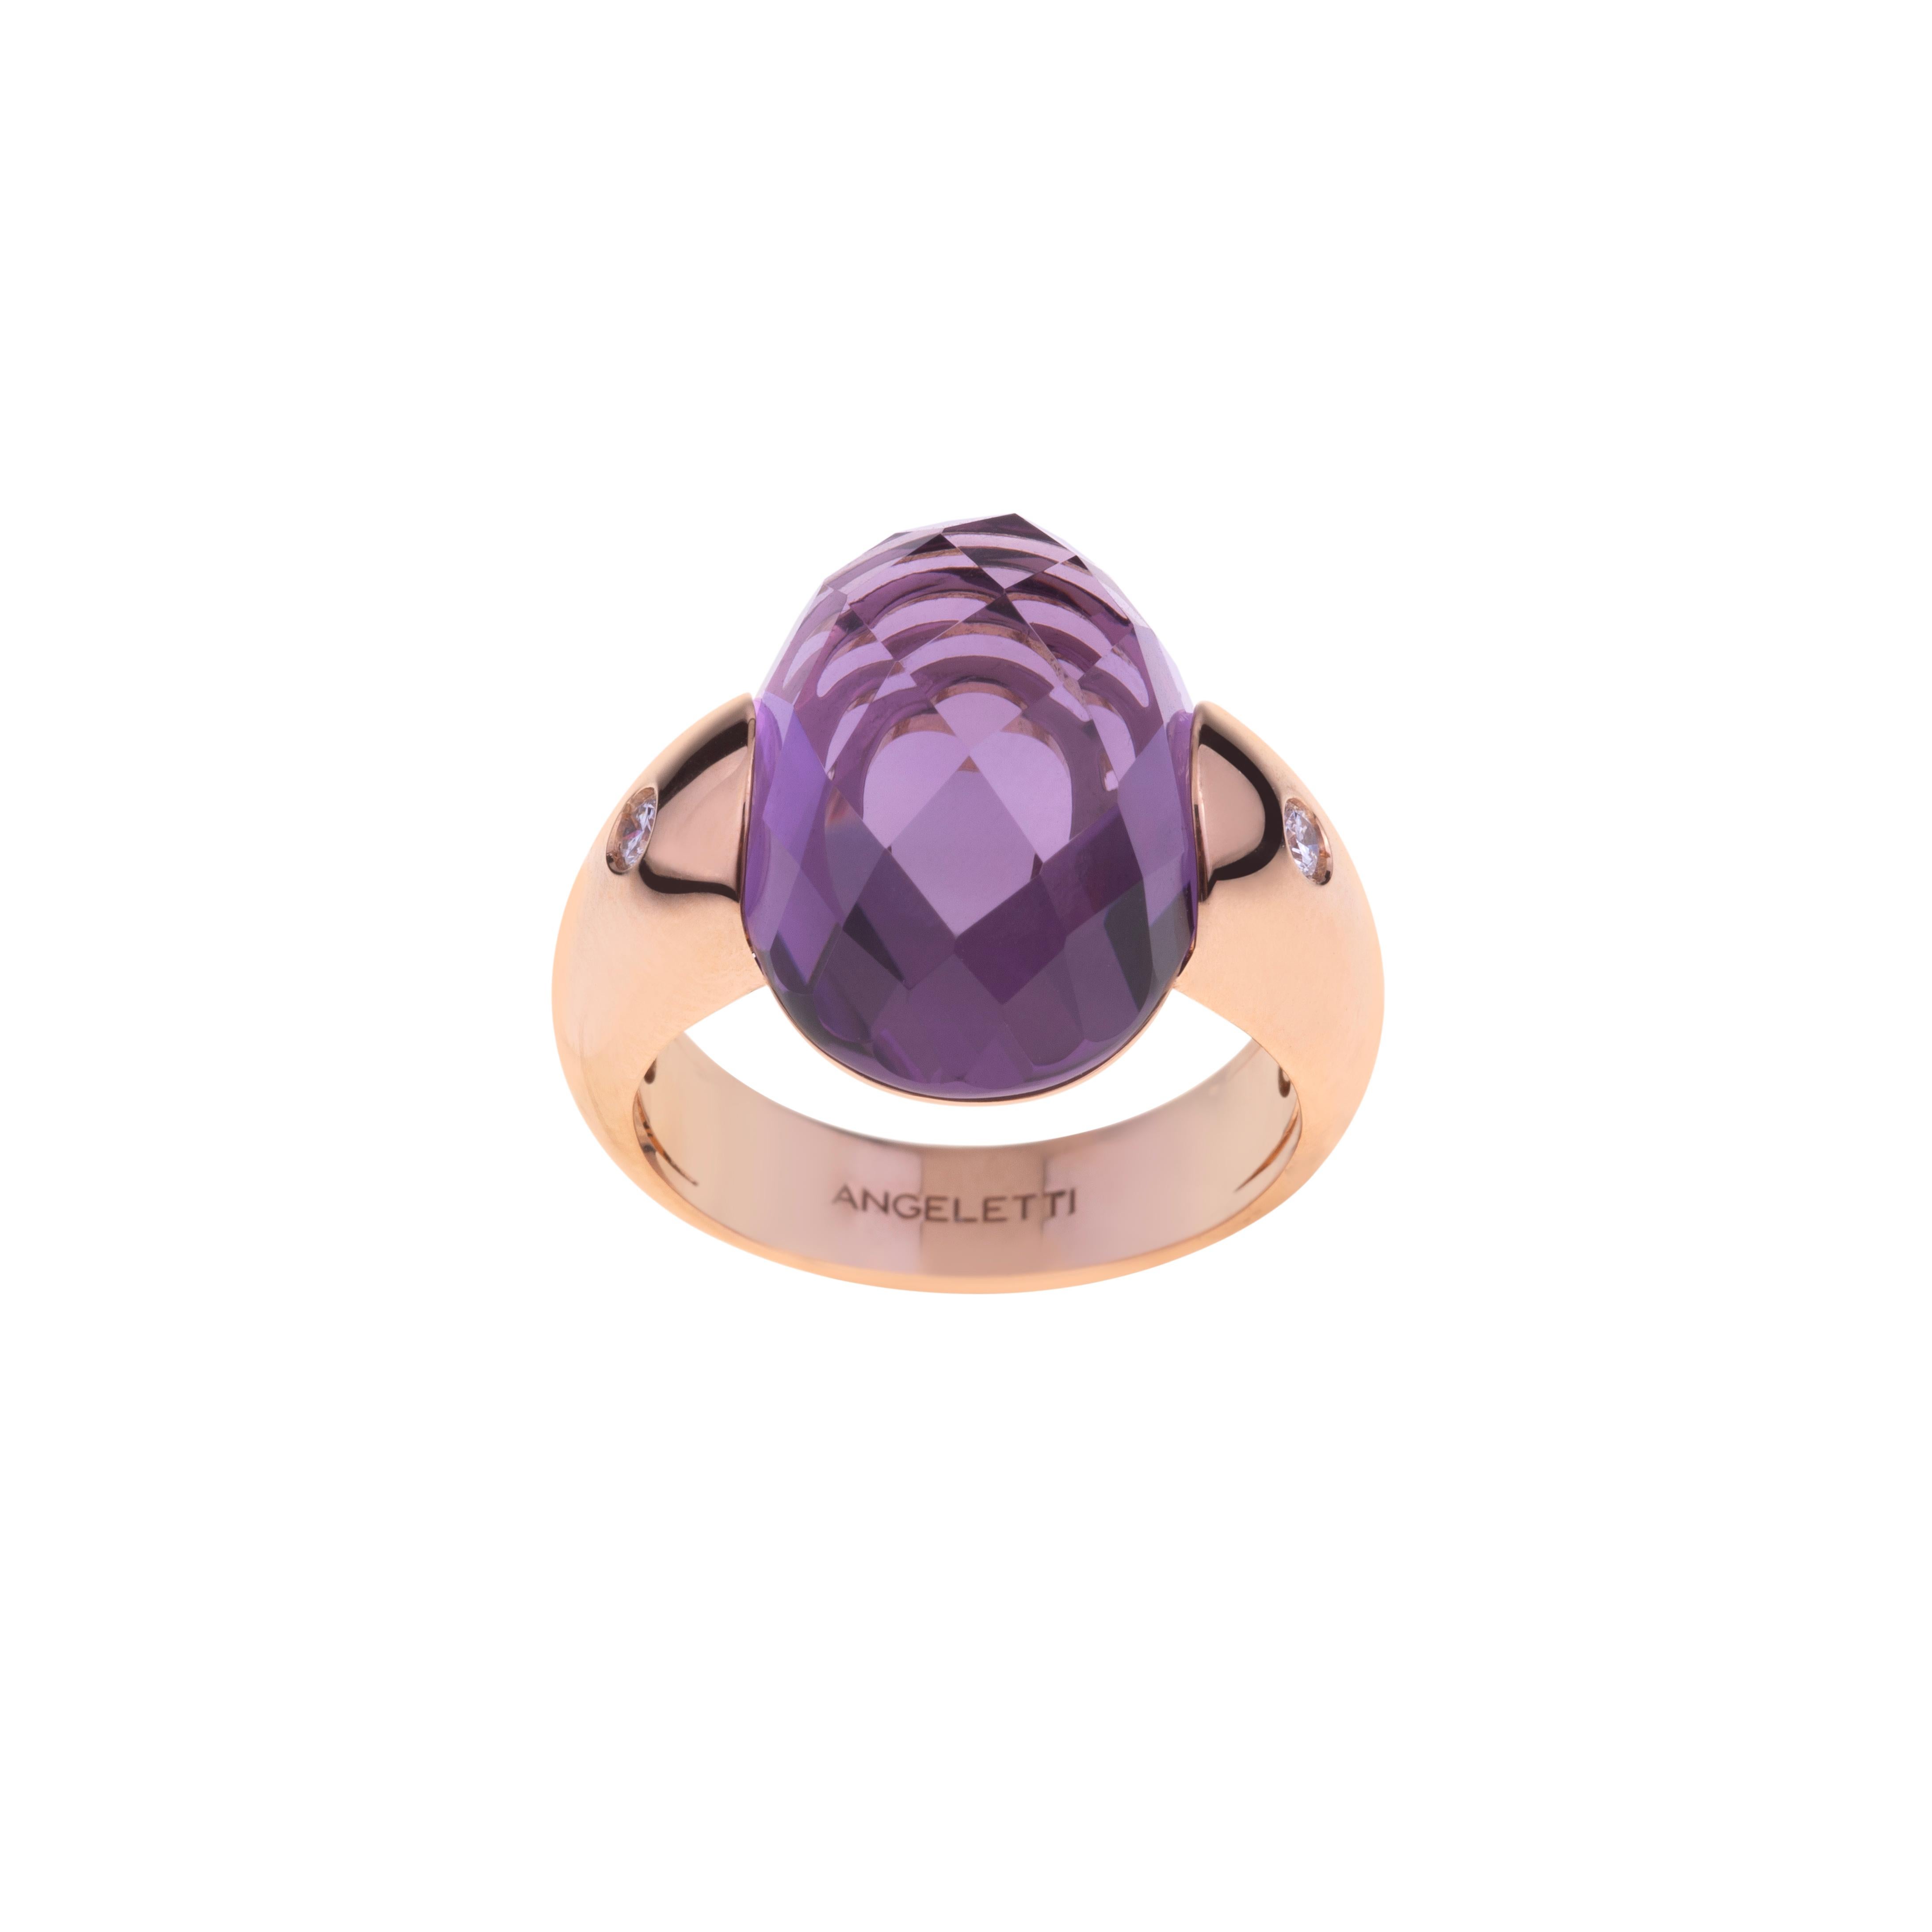 Briolette Cut Embrace Collection by Angeletti. Rose Gold Ring With Amethyst and Diamonds For Sale